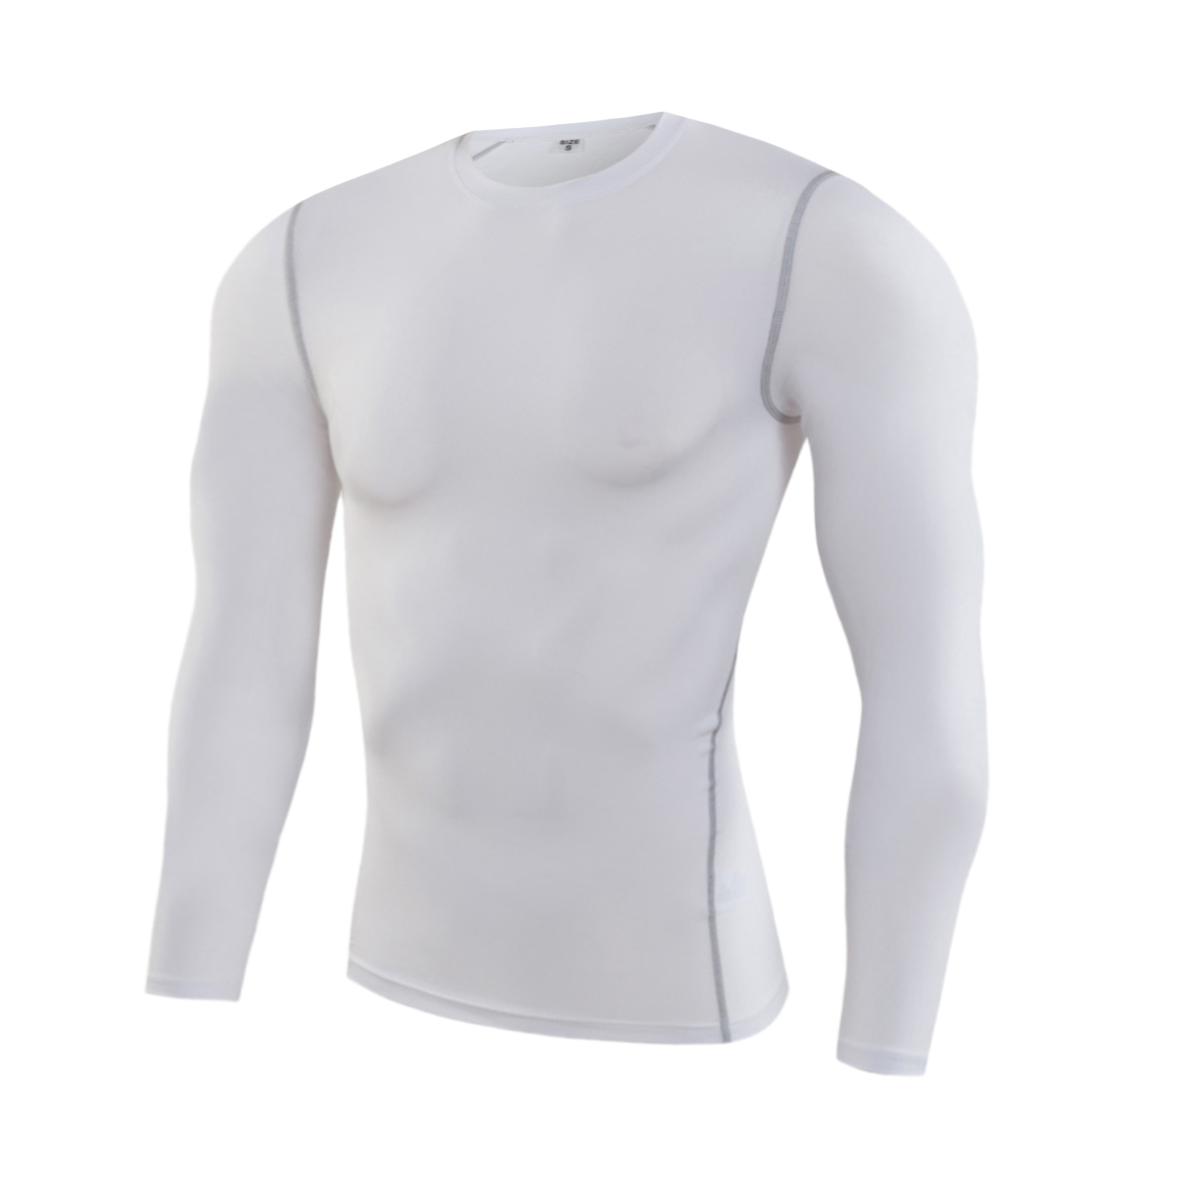 Short Sleeve Compression Base Layer in Black, Gray, and White